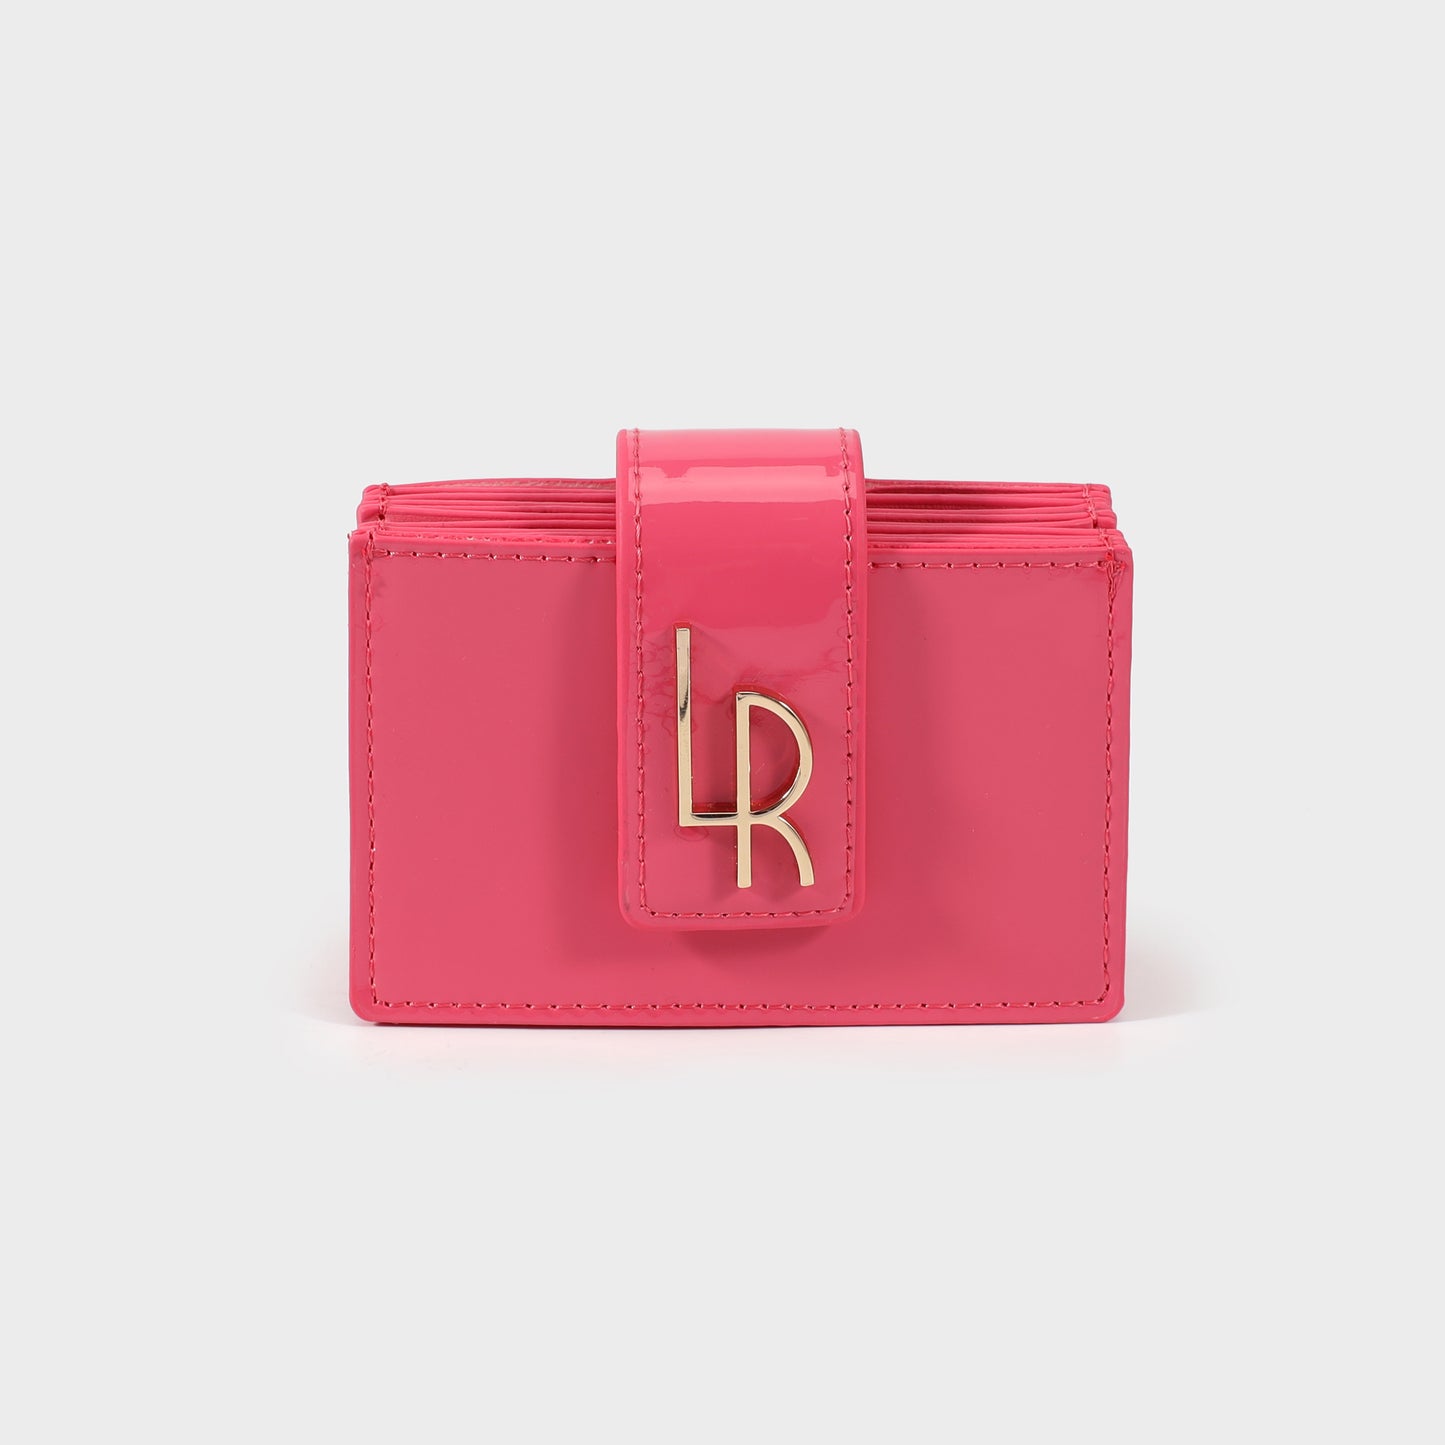 ROSE CARD WALLET 30.05 LE - STRAWBERRY